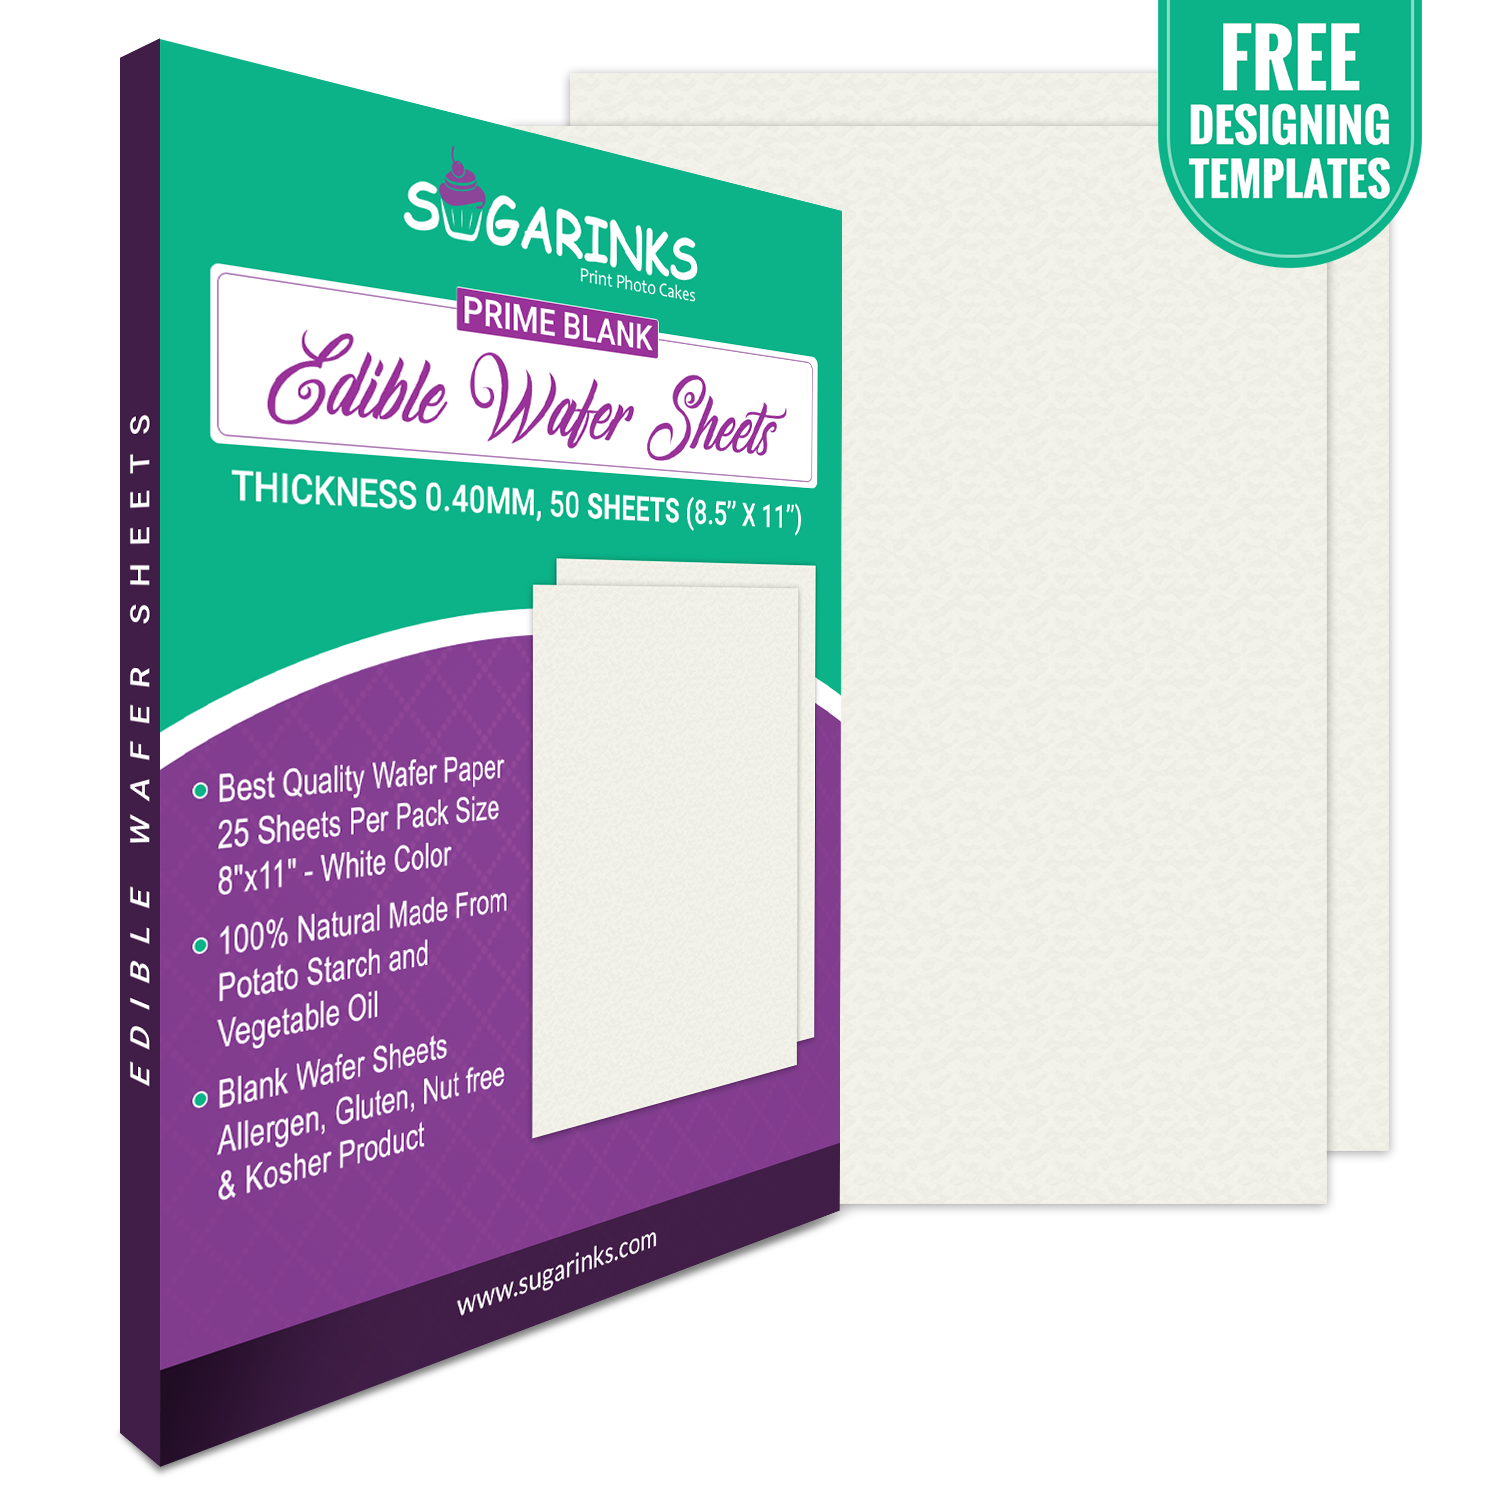 Sugarinks Blank Wafer Sheets For Cakes and Cookies Pack of 25 Sheets A4 size Premium Quality– 0.40mm Thickness 